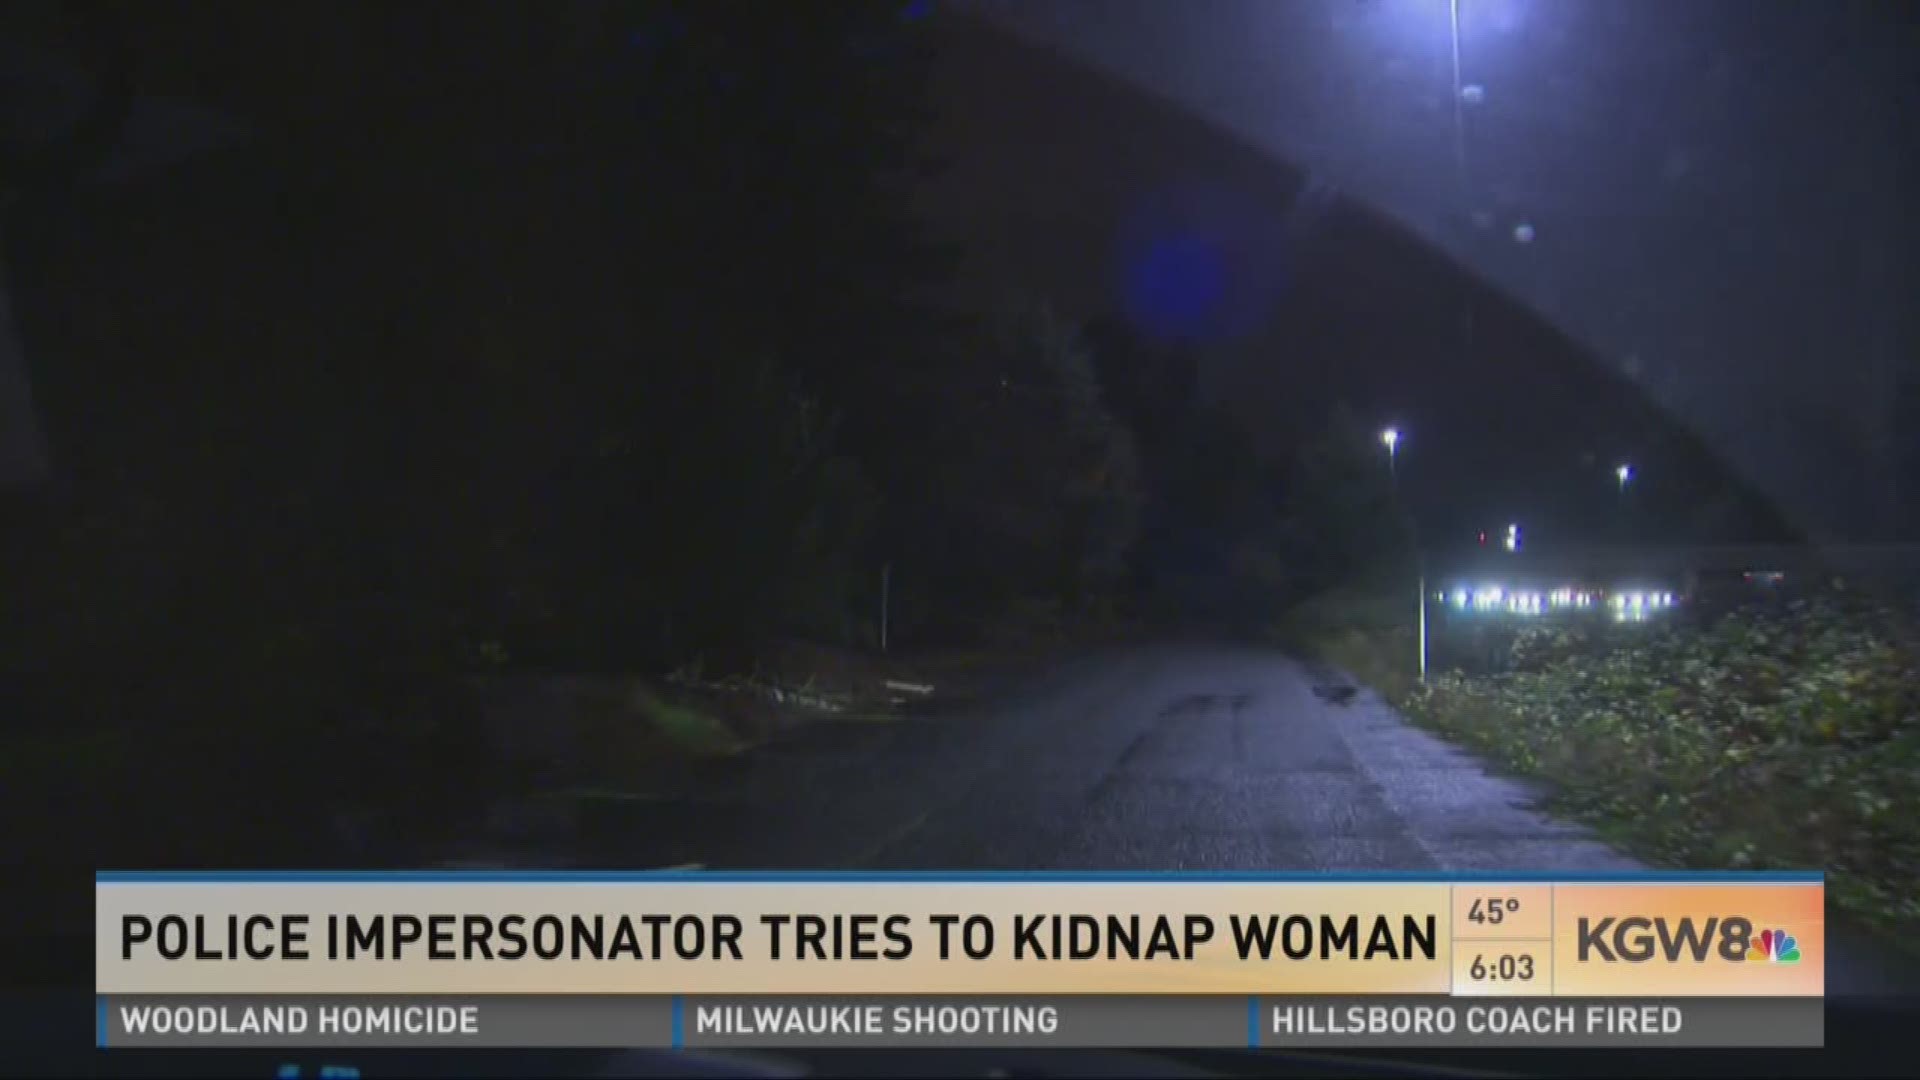 Police impersonator tries to kidnap woman